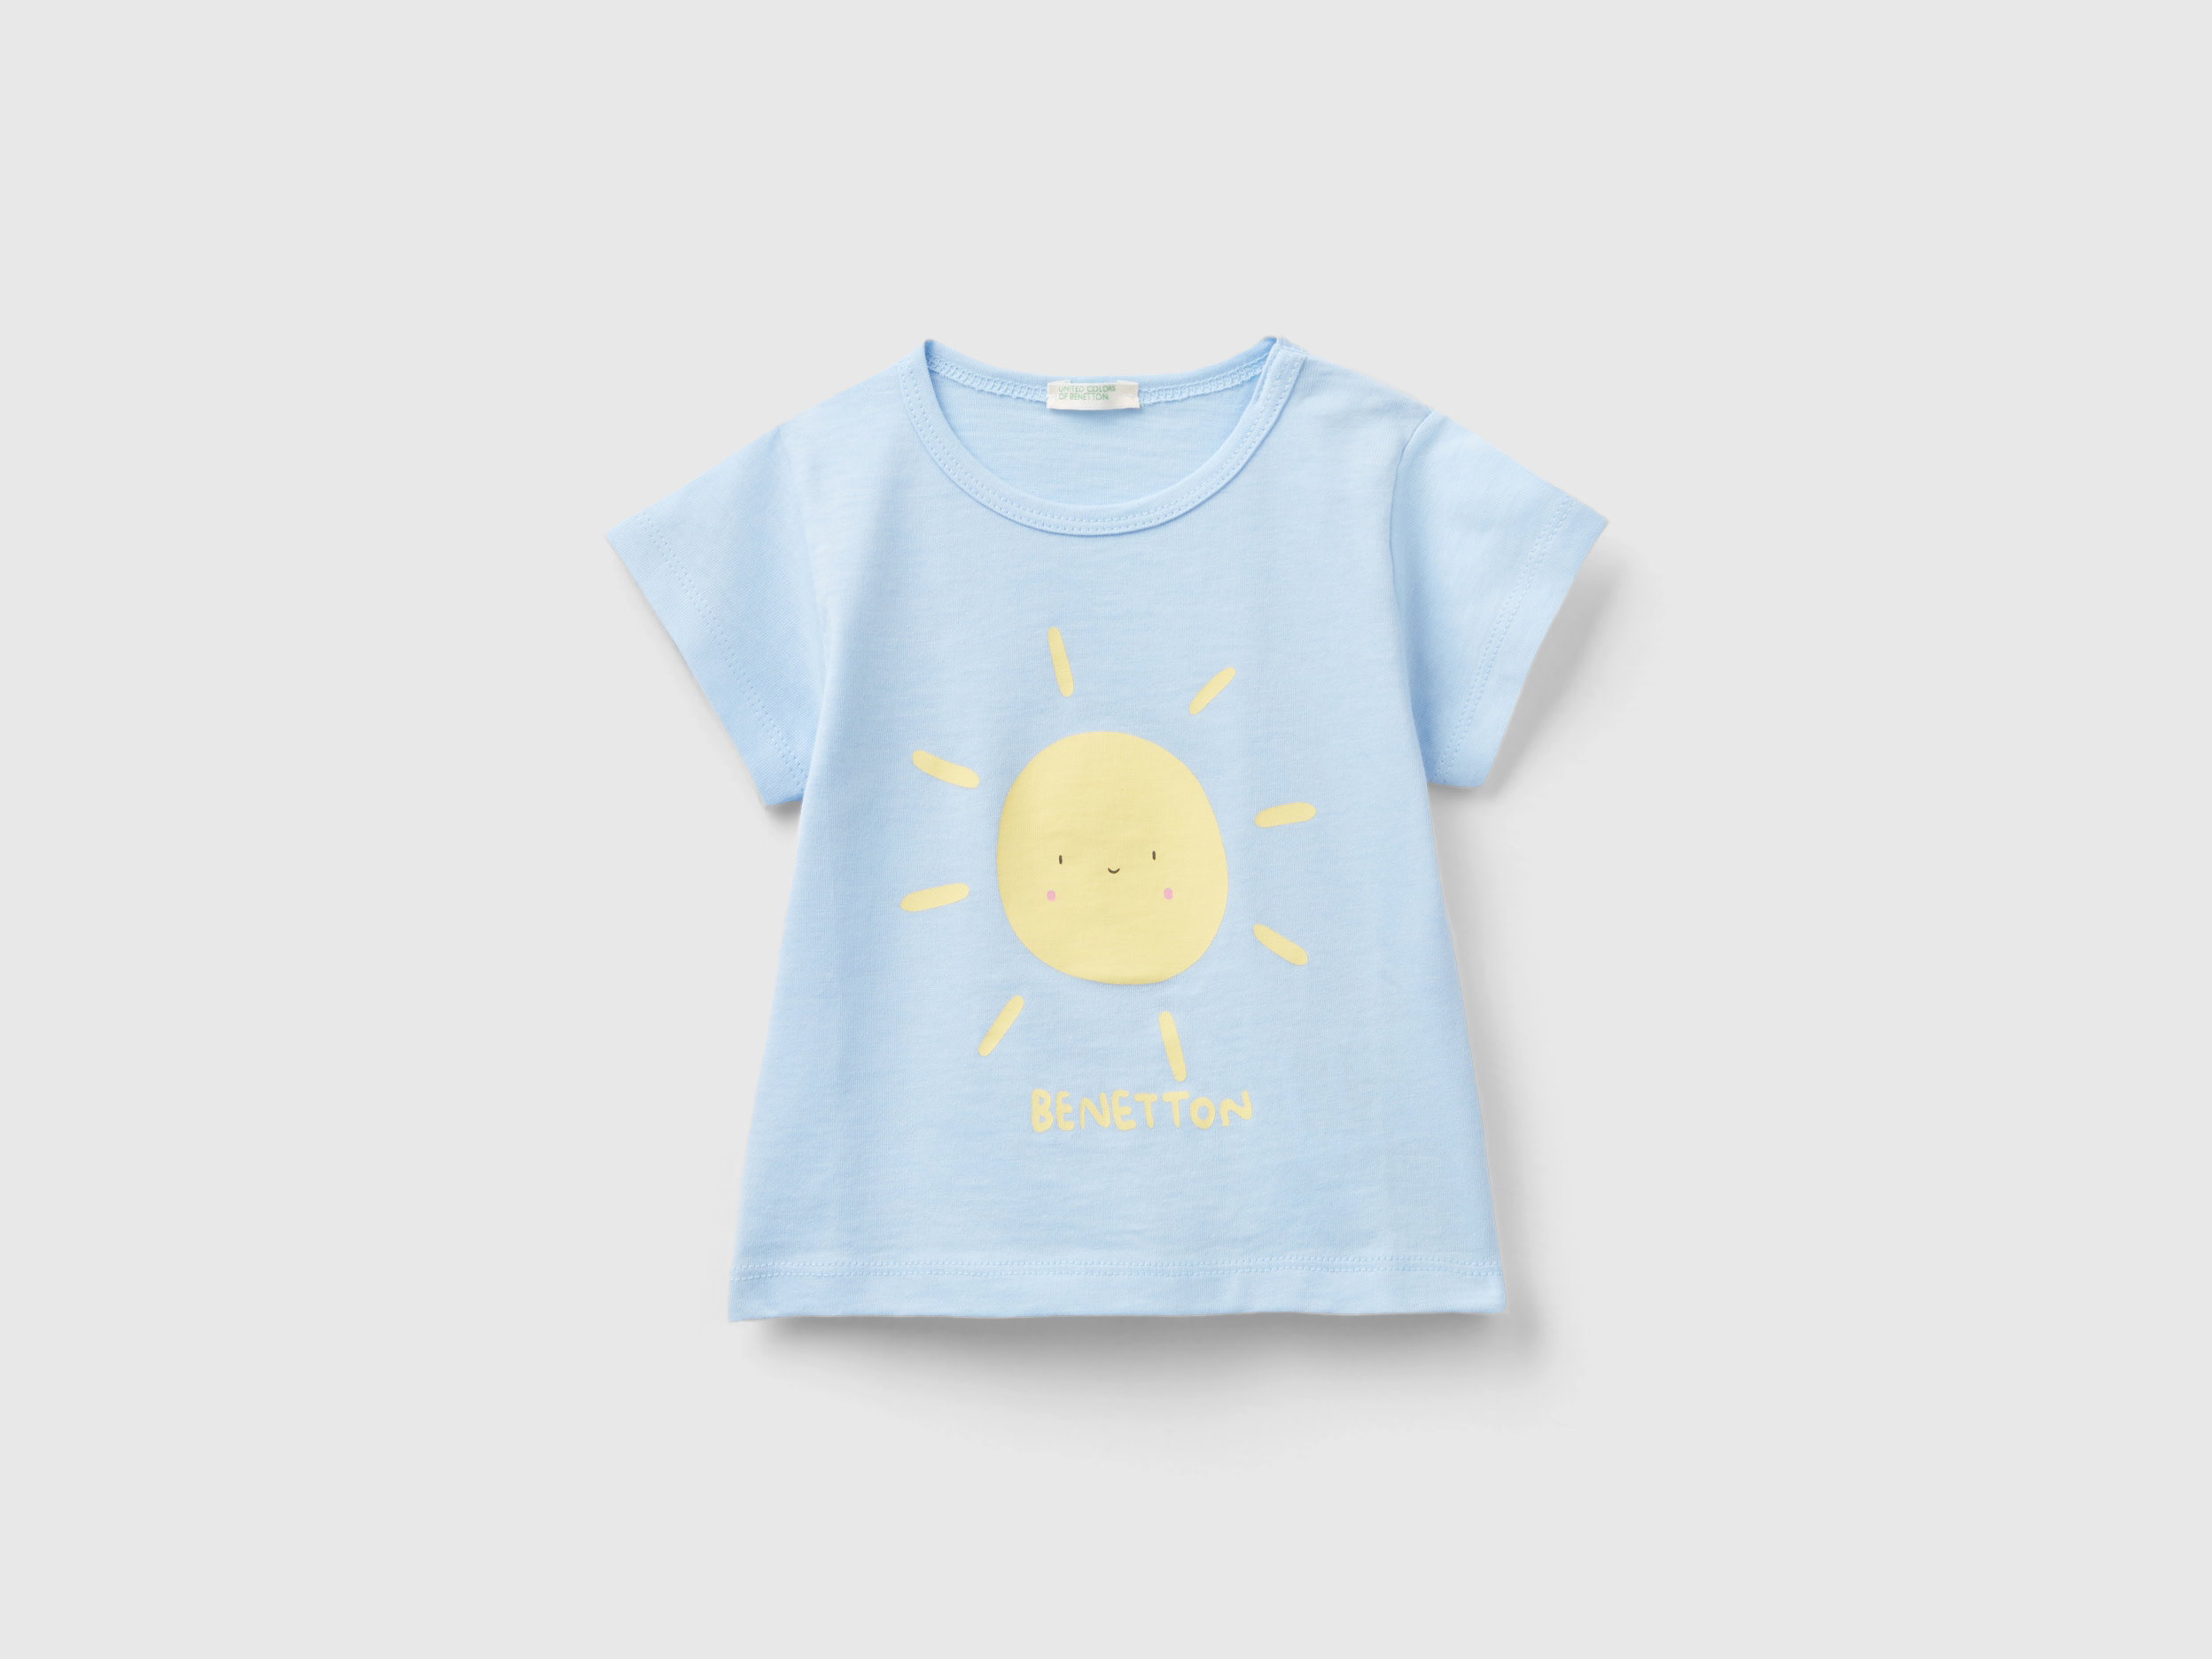 Image of Benetton, Organic Cotton T-shirt With Print, size 82, Sky Blue, Kids